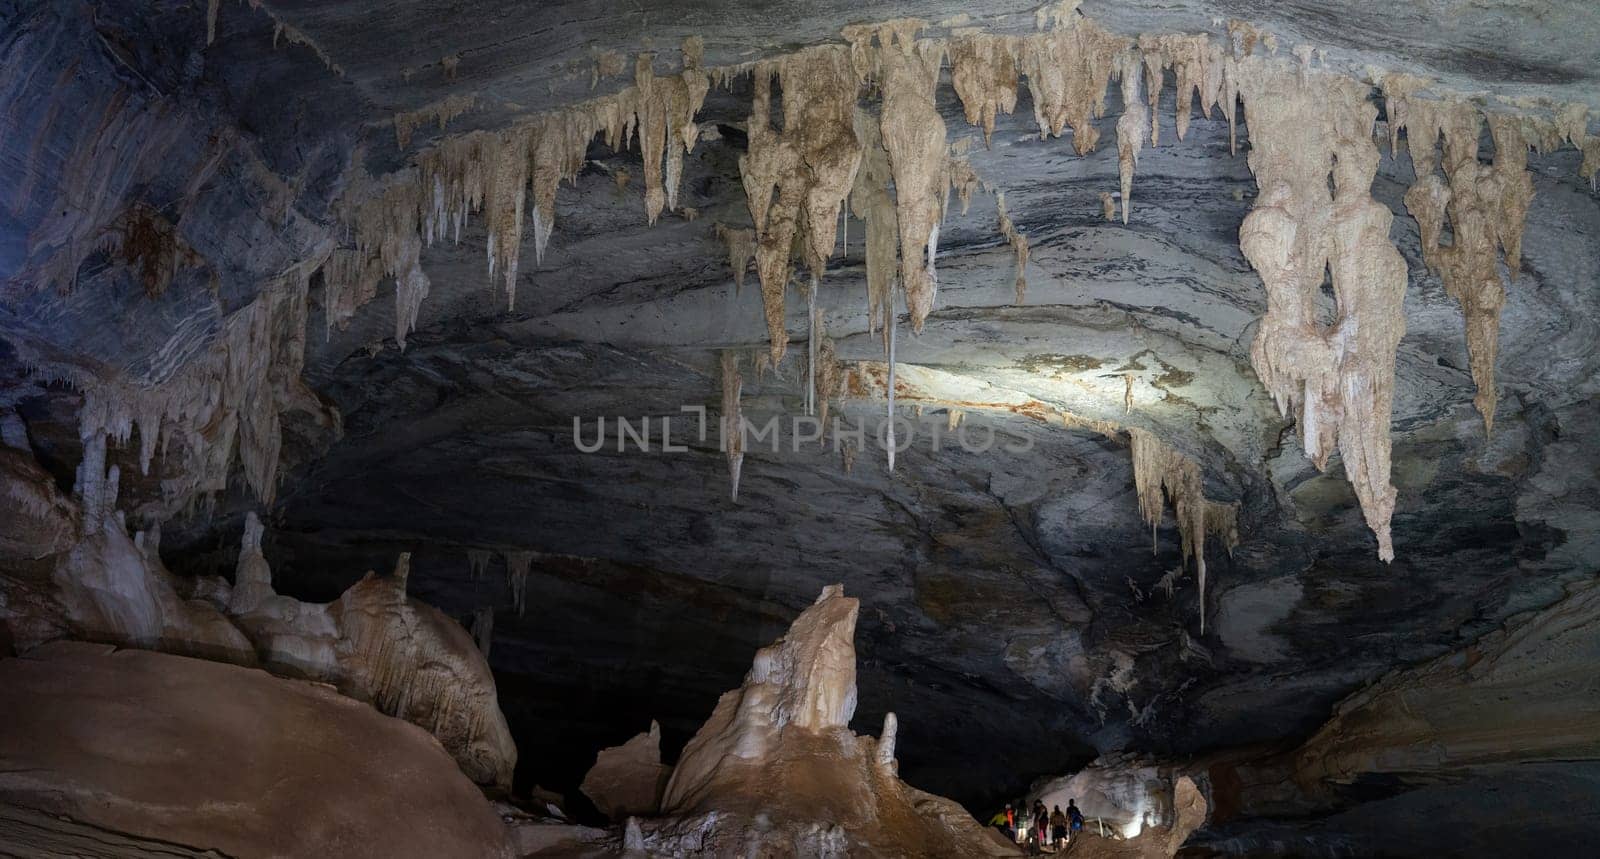 Anonymous tourists explore a large cave, lit by handheld lanterns that highlight its geological features.